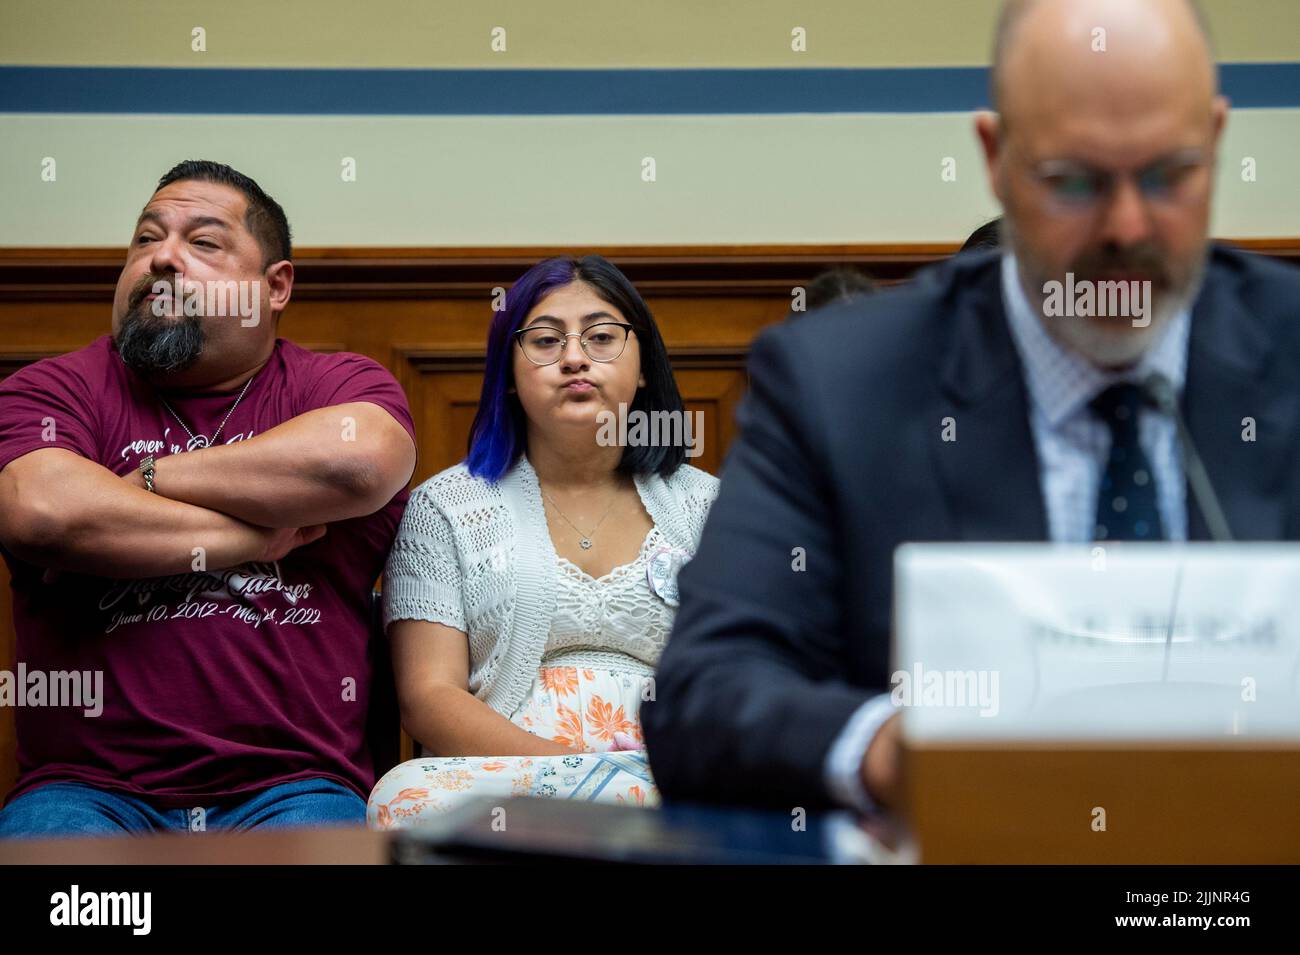 Washington, United States Of America. 27th July, 2022. Jazmin Cazares, center, whose nine year-old sister Jacklyn Cazares, was one of the children killed by a gunman at Robb Elementary School in Uvalde, Texas, is seated next to her father Javier Cazares, left, during a House Committee on Oversight and Reform hearing “Examining the Practices and Profits of Gun Manufacturers” in the Rayburn House Office Building in Washington, DC, July 27, 2022. Credit: Rod Lamkey/CNP/Sipa USA Credit: Sipa USA/Alamy Live News Stock Photo